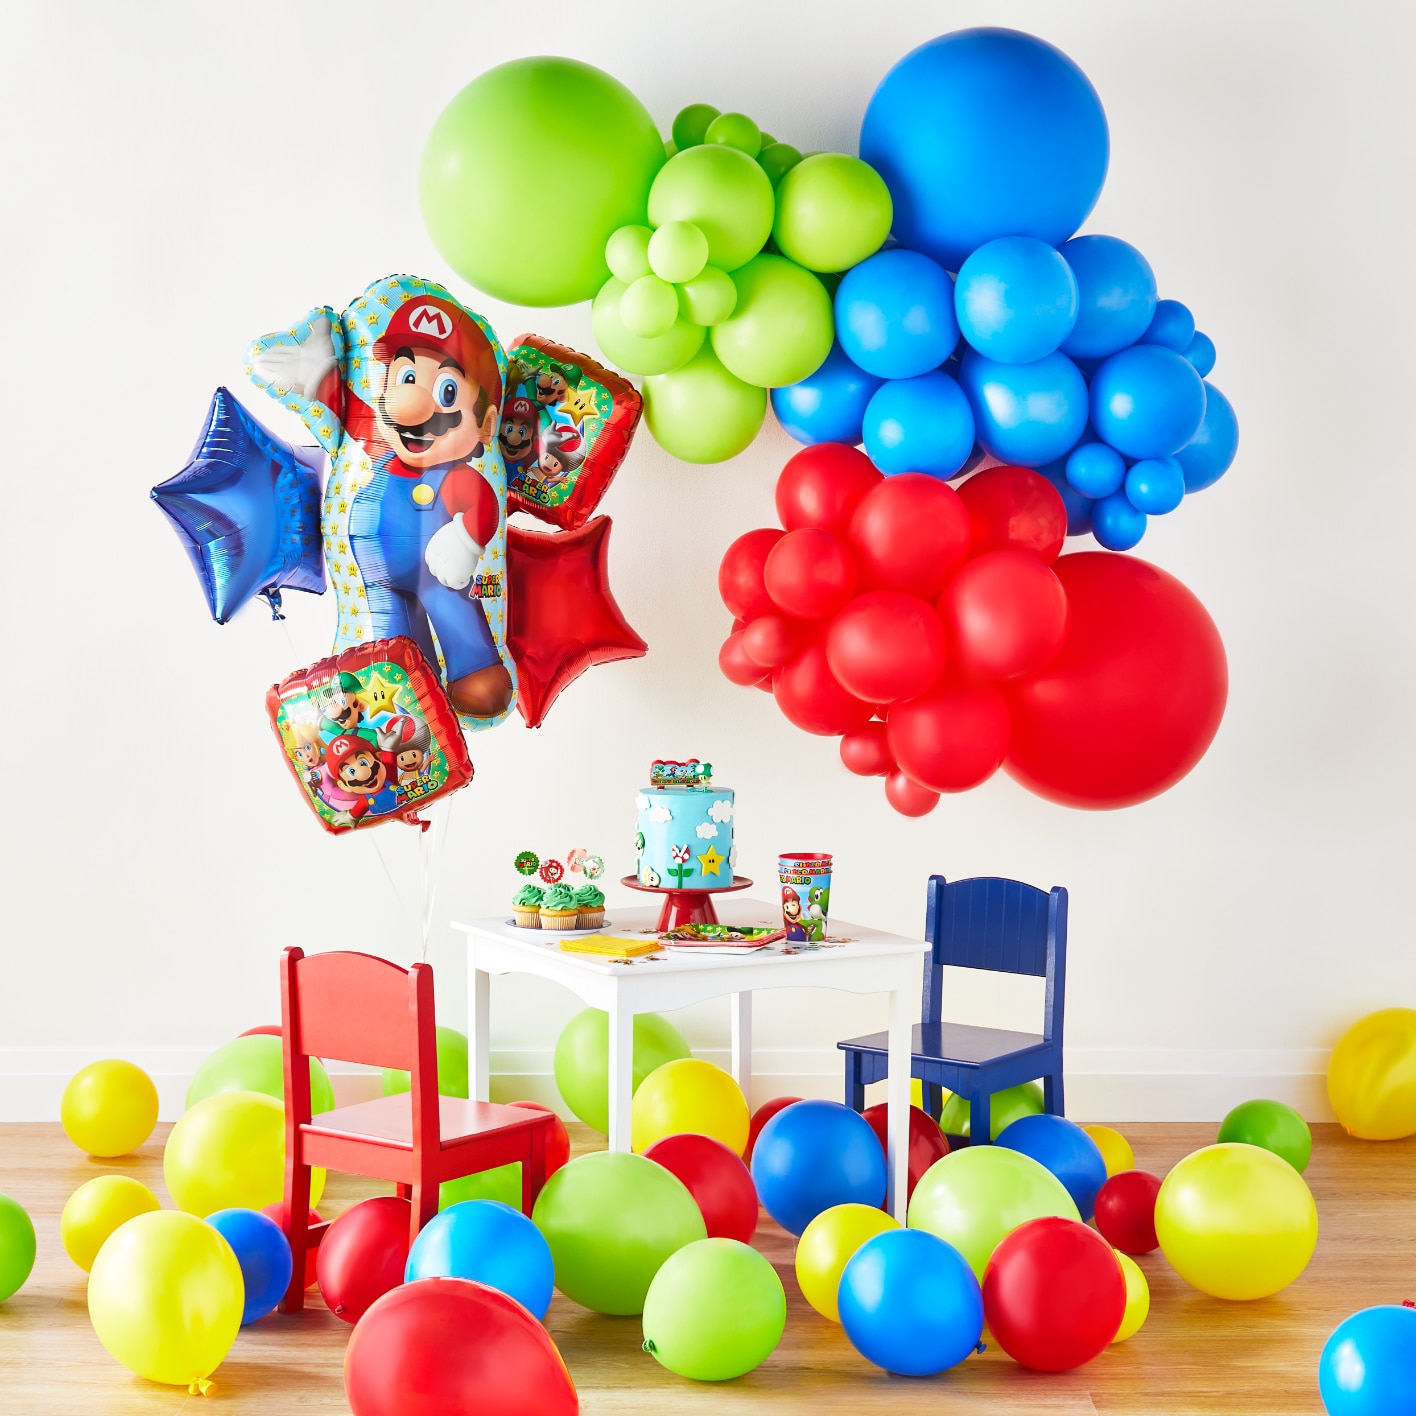 Colourful and themed balloons surrounding table with a cake and treats.